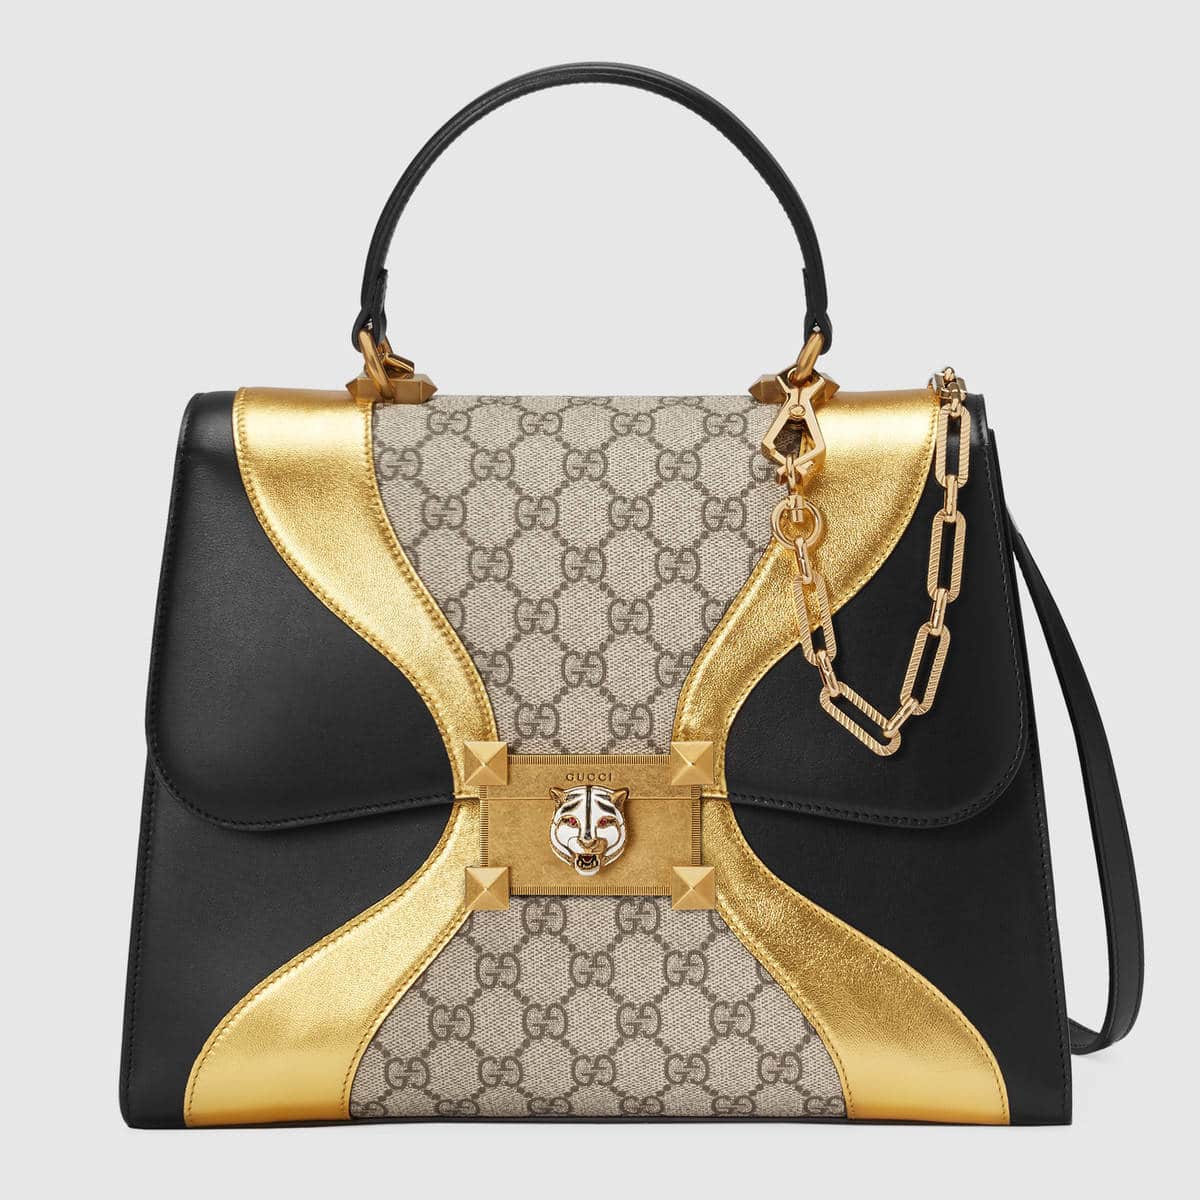 Europe Gucci Bag Price List Reference Guide | Spotted Fashion